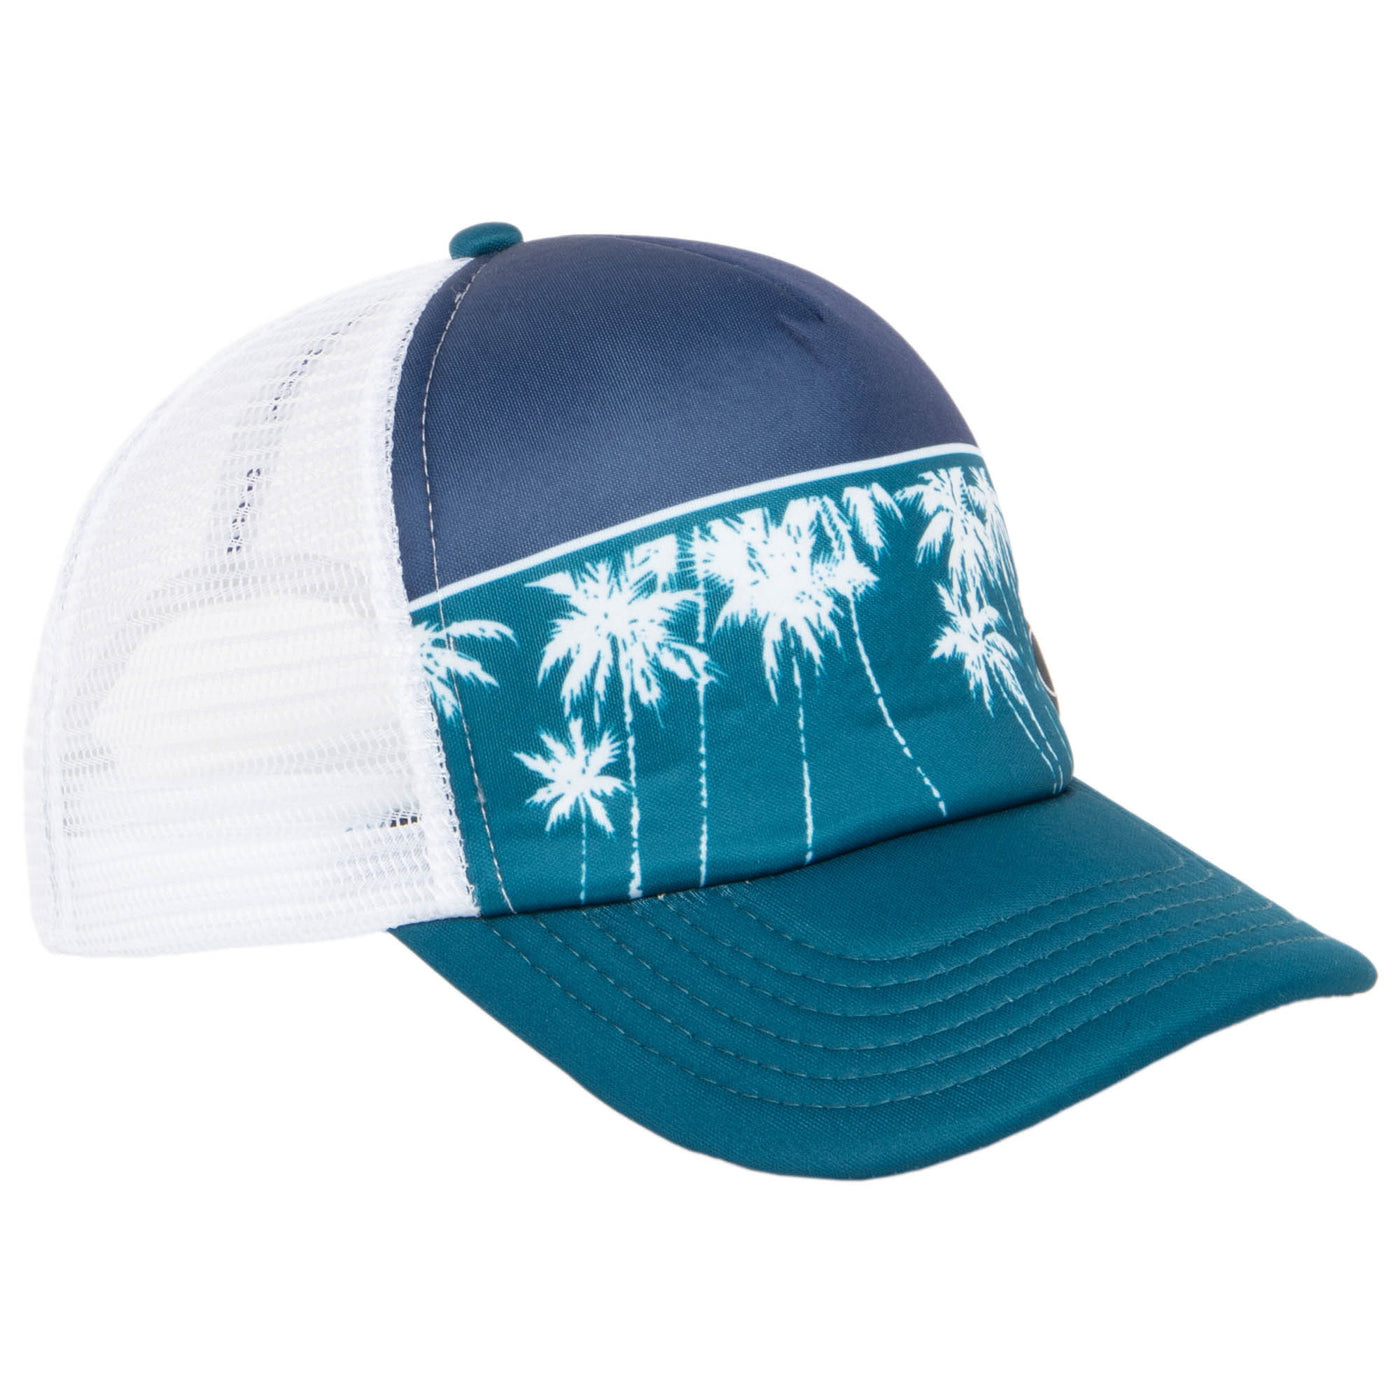 Ocean Pacific - 5 Panel Trucker Hat with White Palm Tree Print-Trucker-San Diego Hat Company